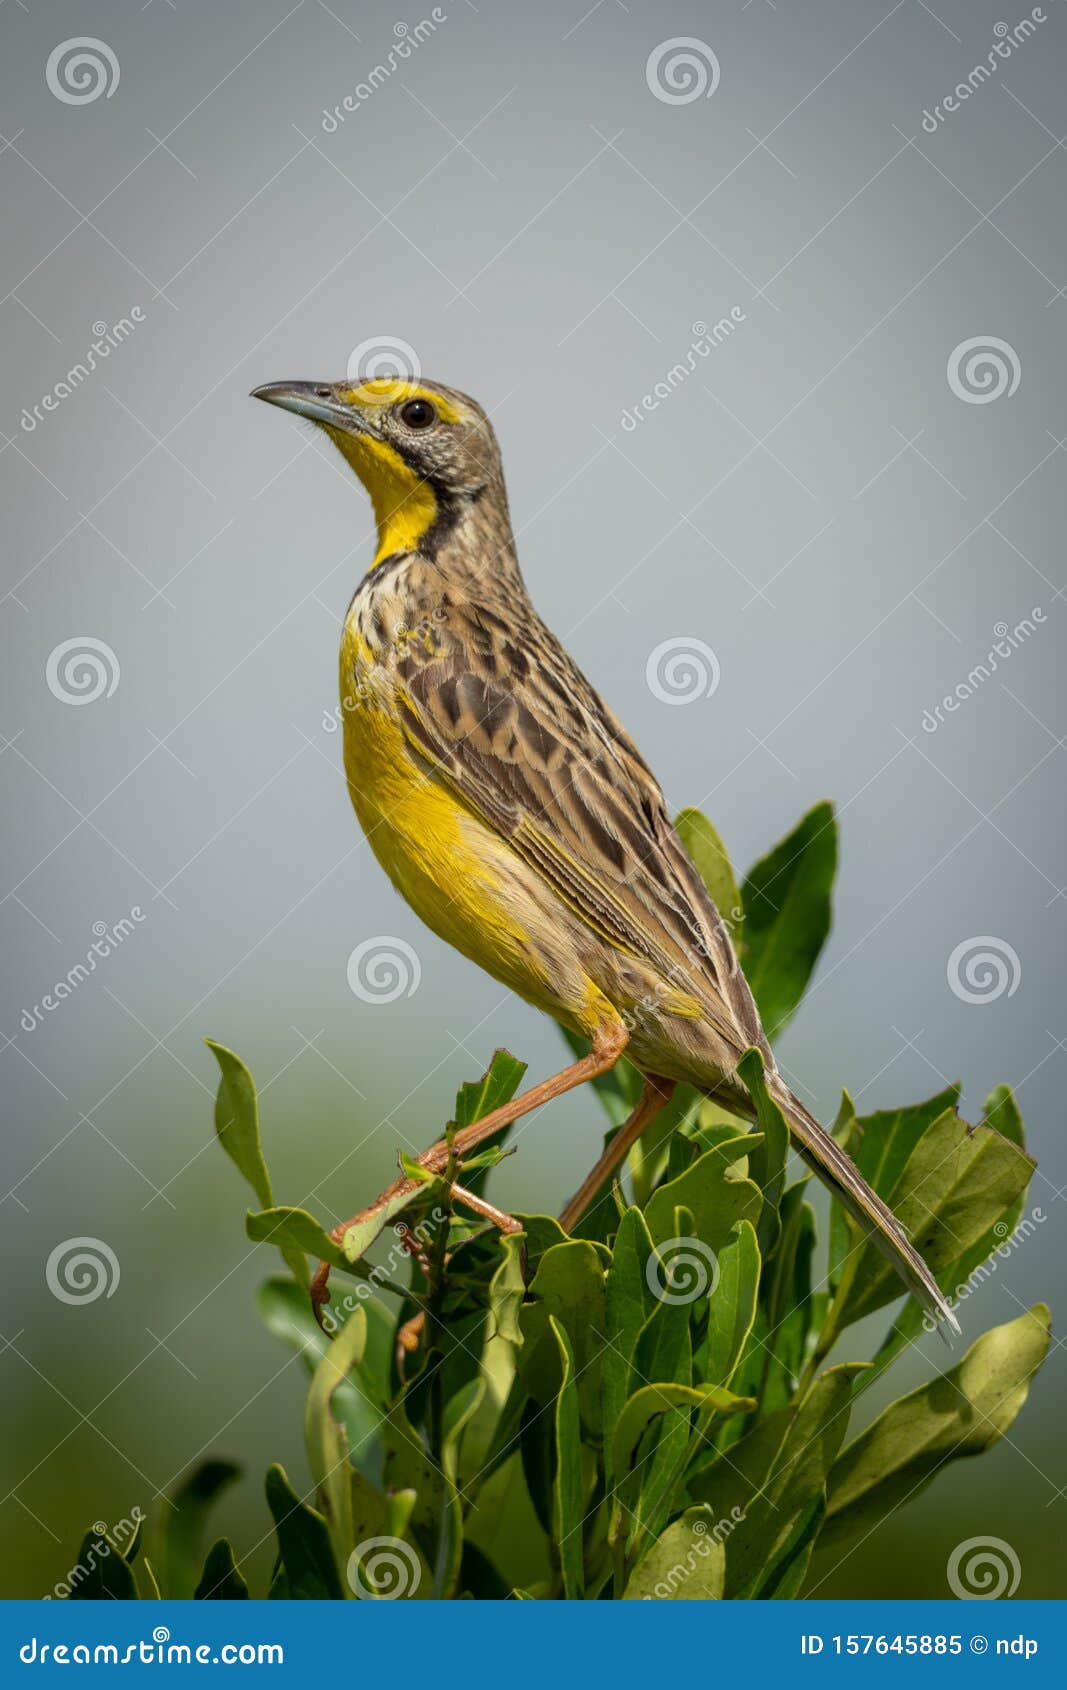 yellow-throated longclaw perched on bush with catchlight